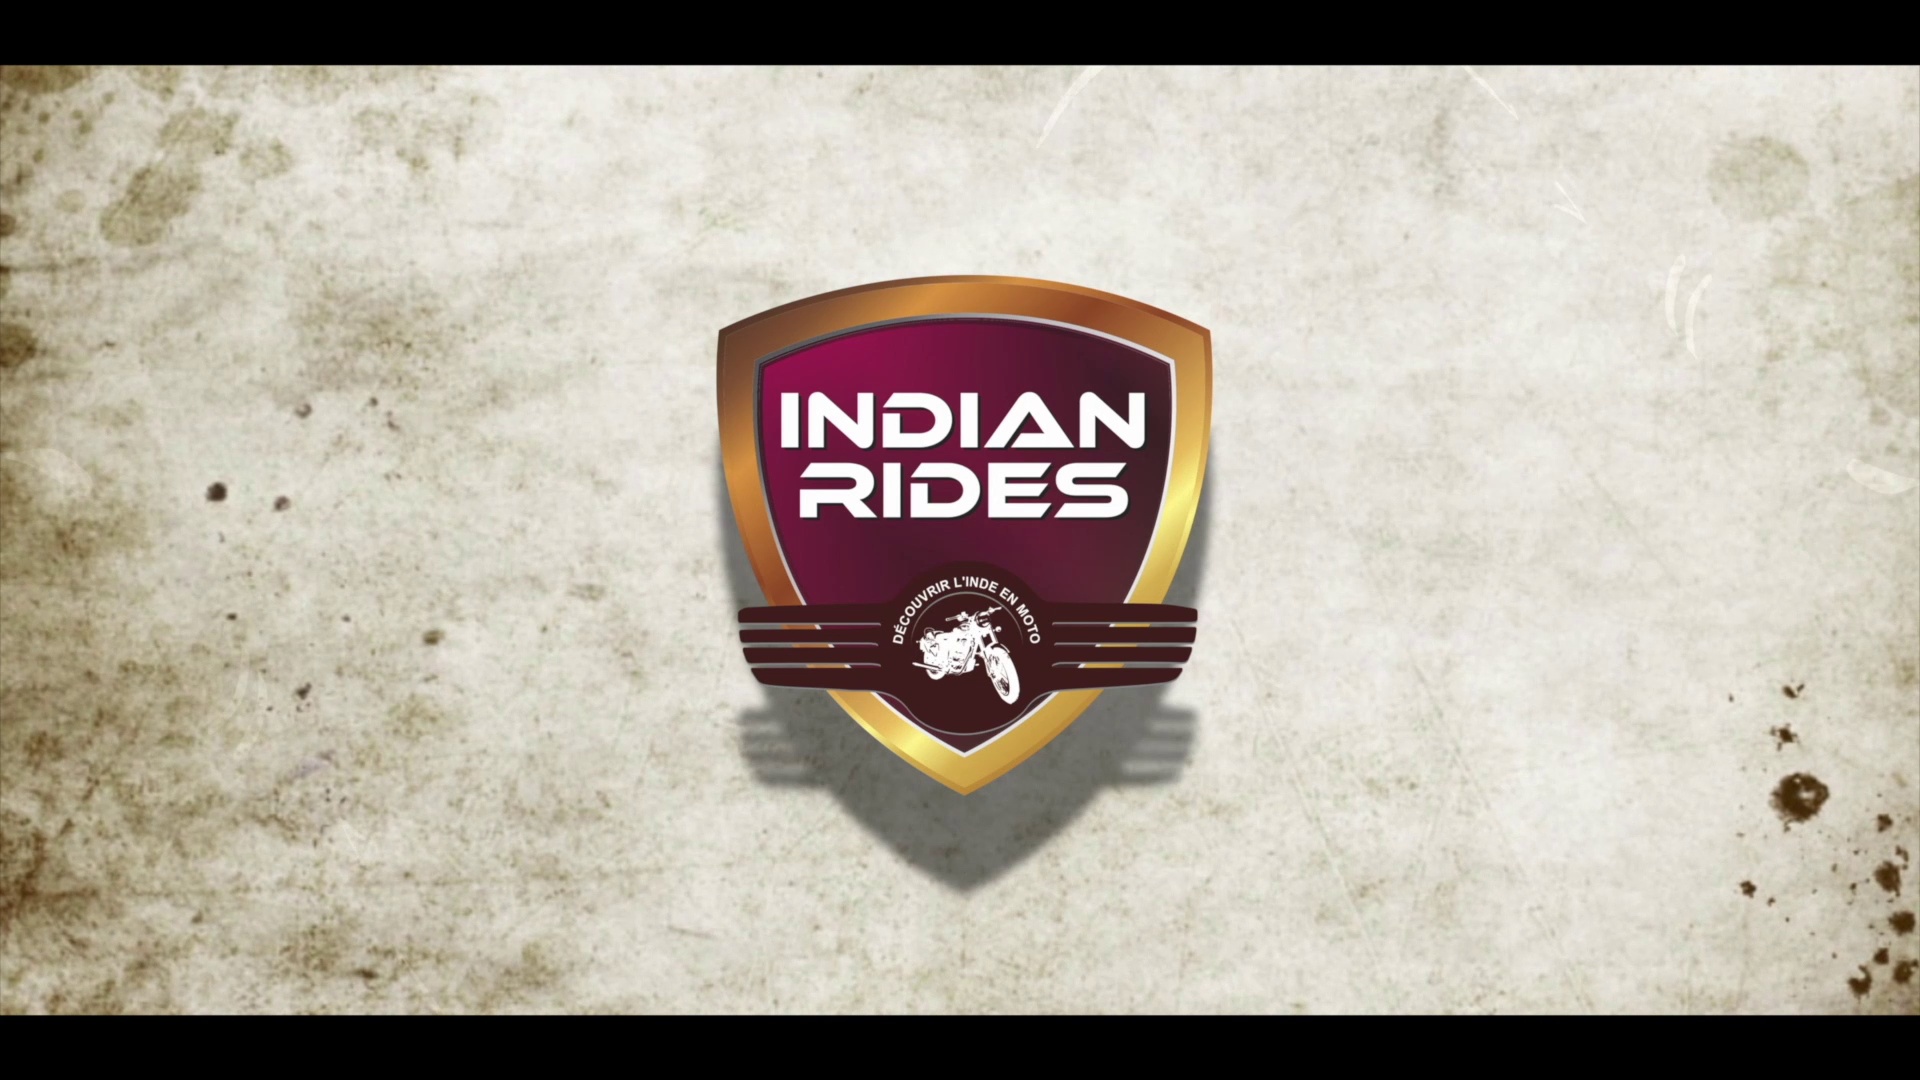 Amazing SouthIndia motorcycle Experience – Motorcycle Tour in South India with Indian Rides